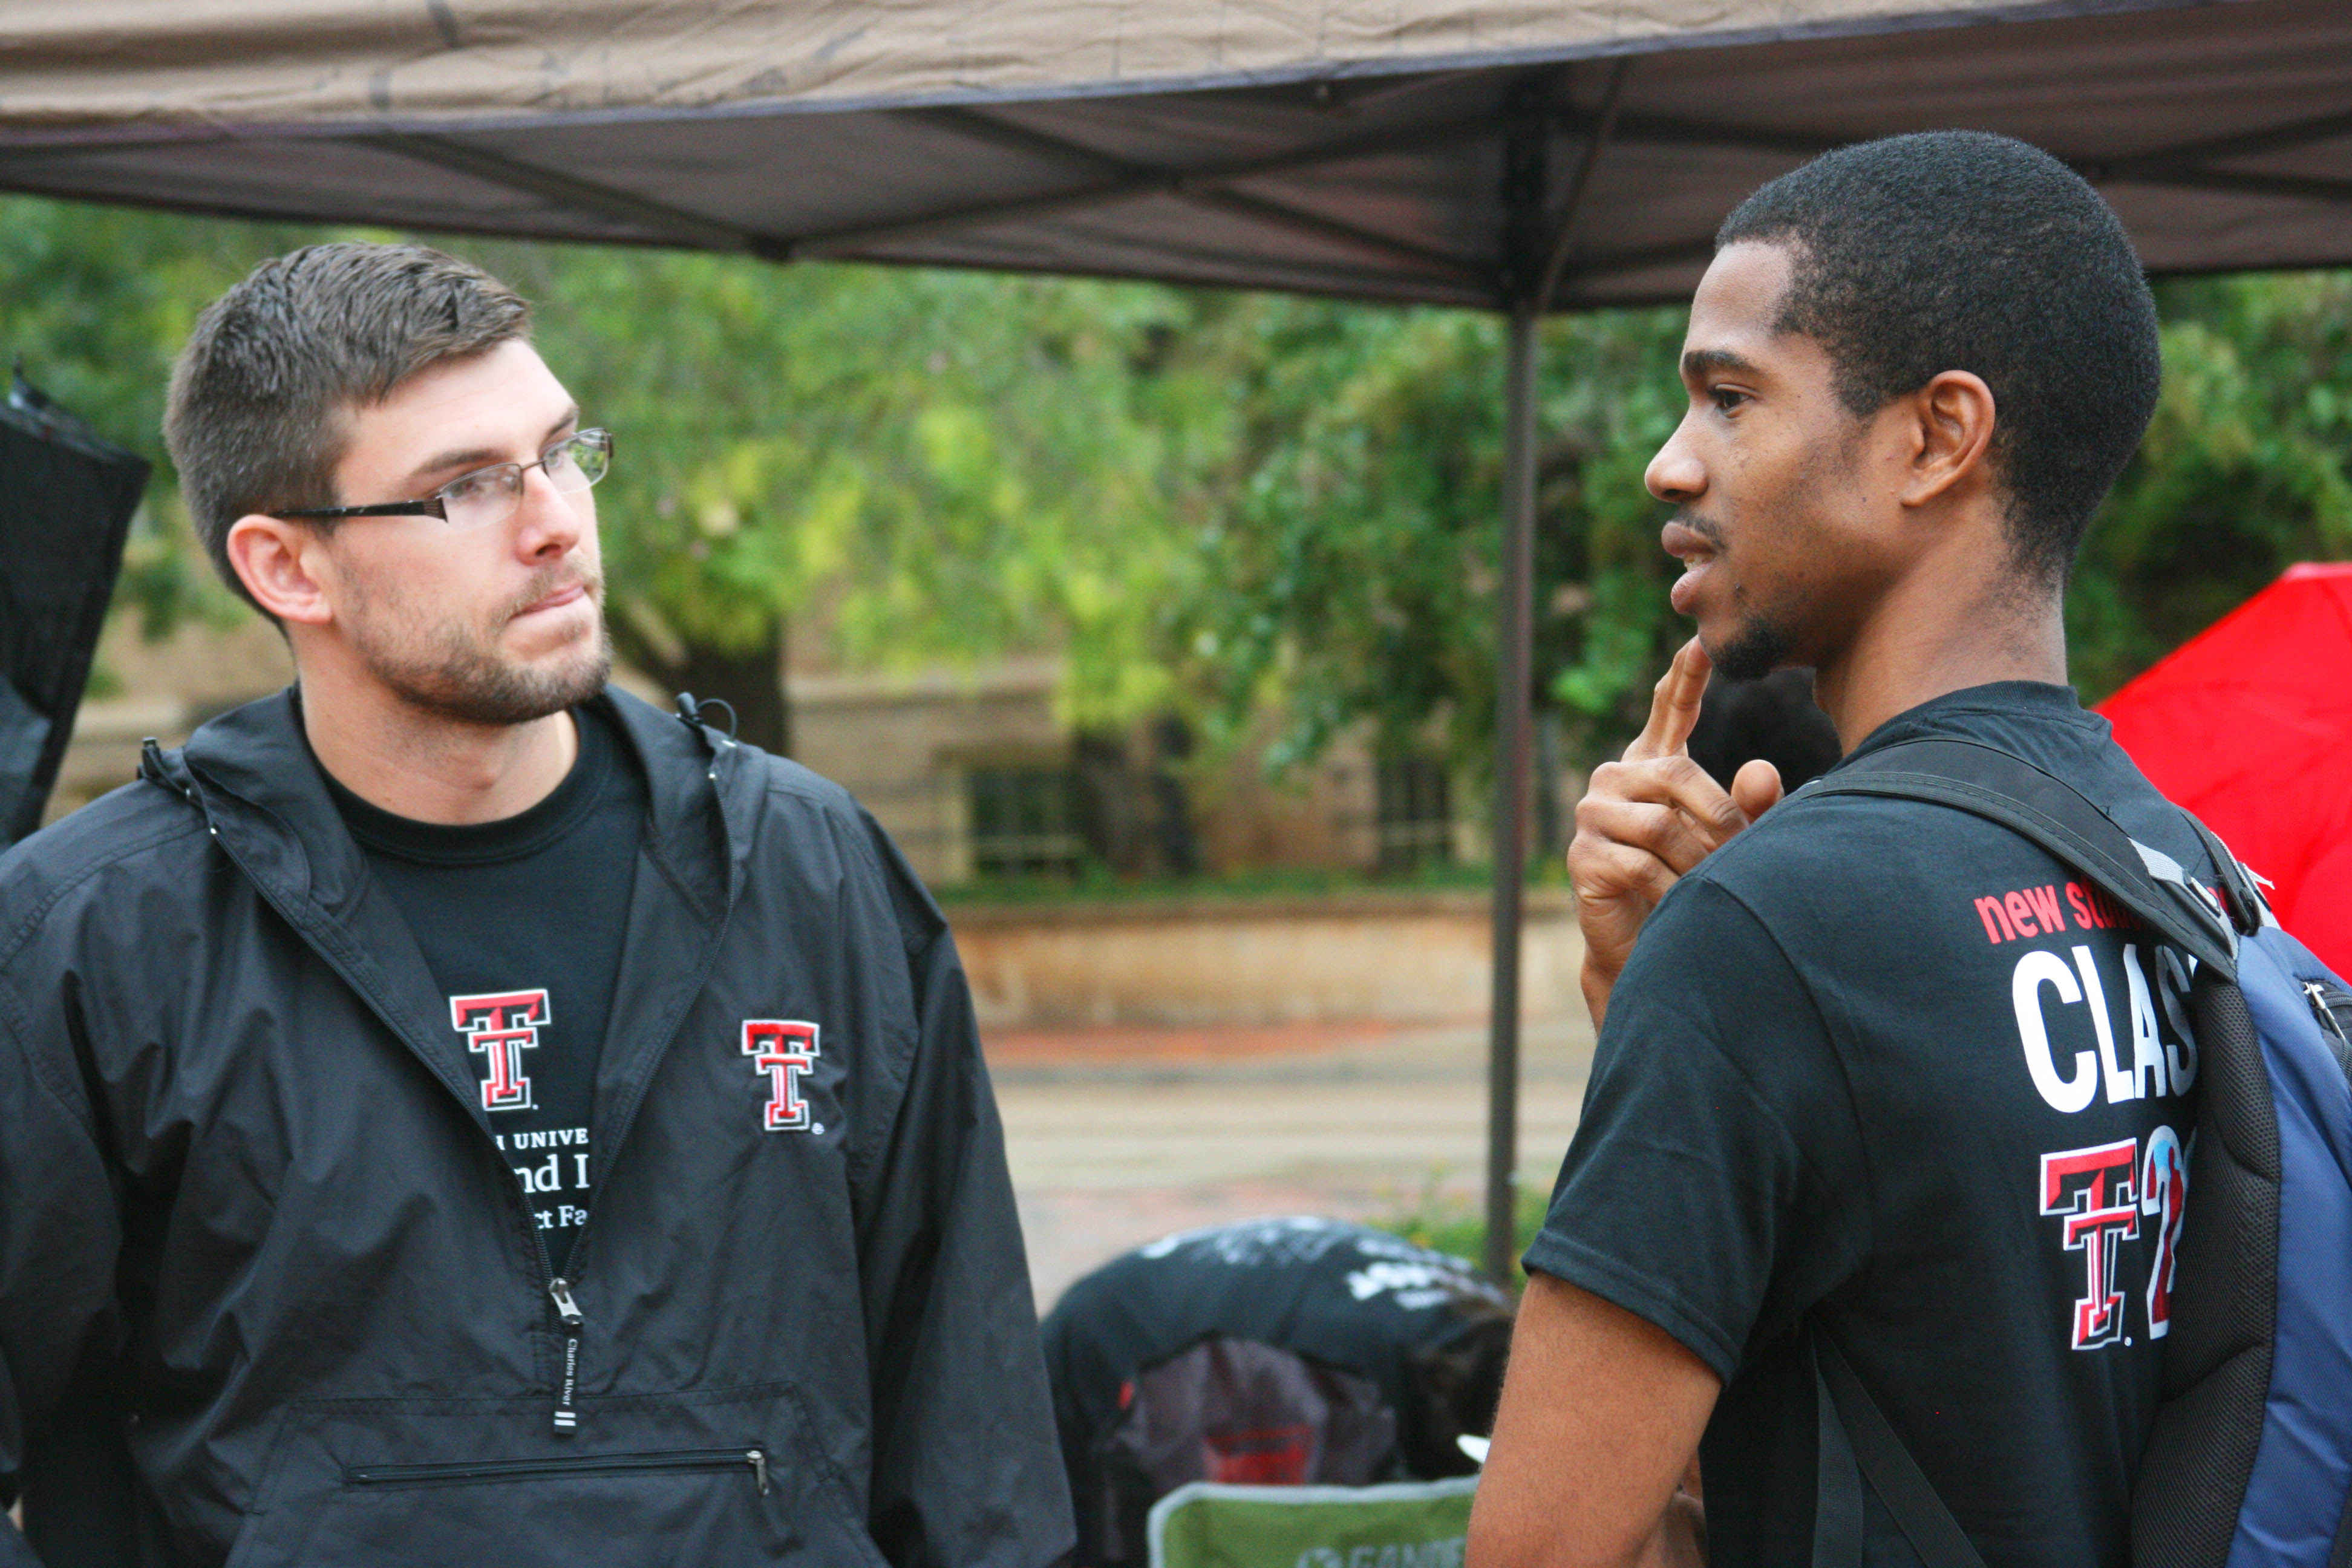 NWI Ph.D. student Rich Krupar III chats with a potential student about the program.